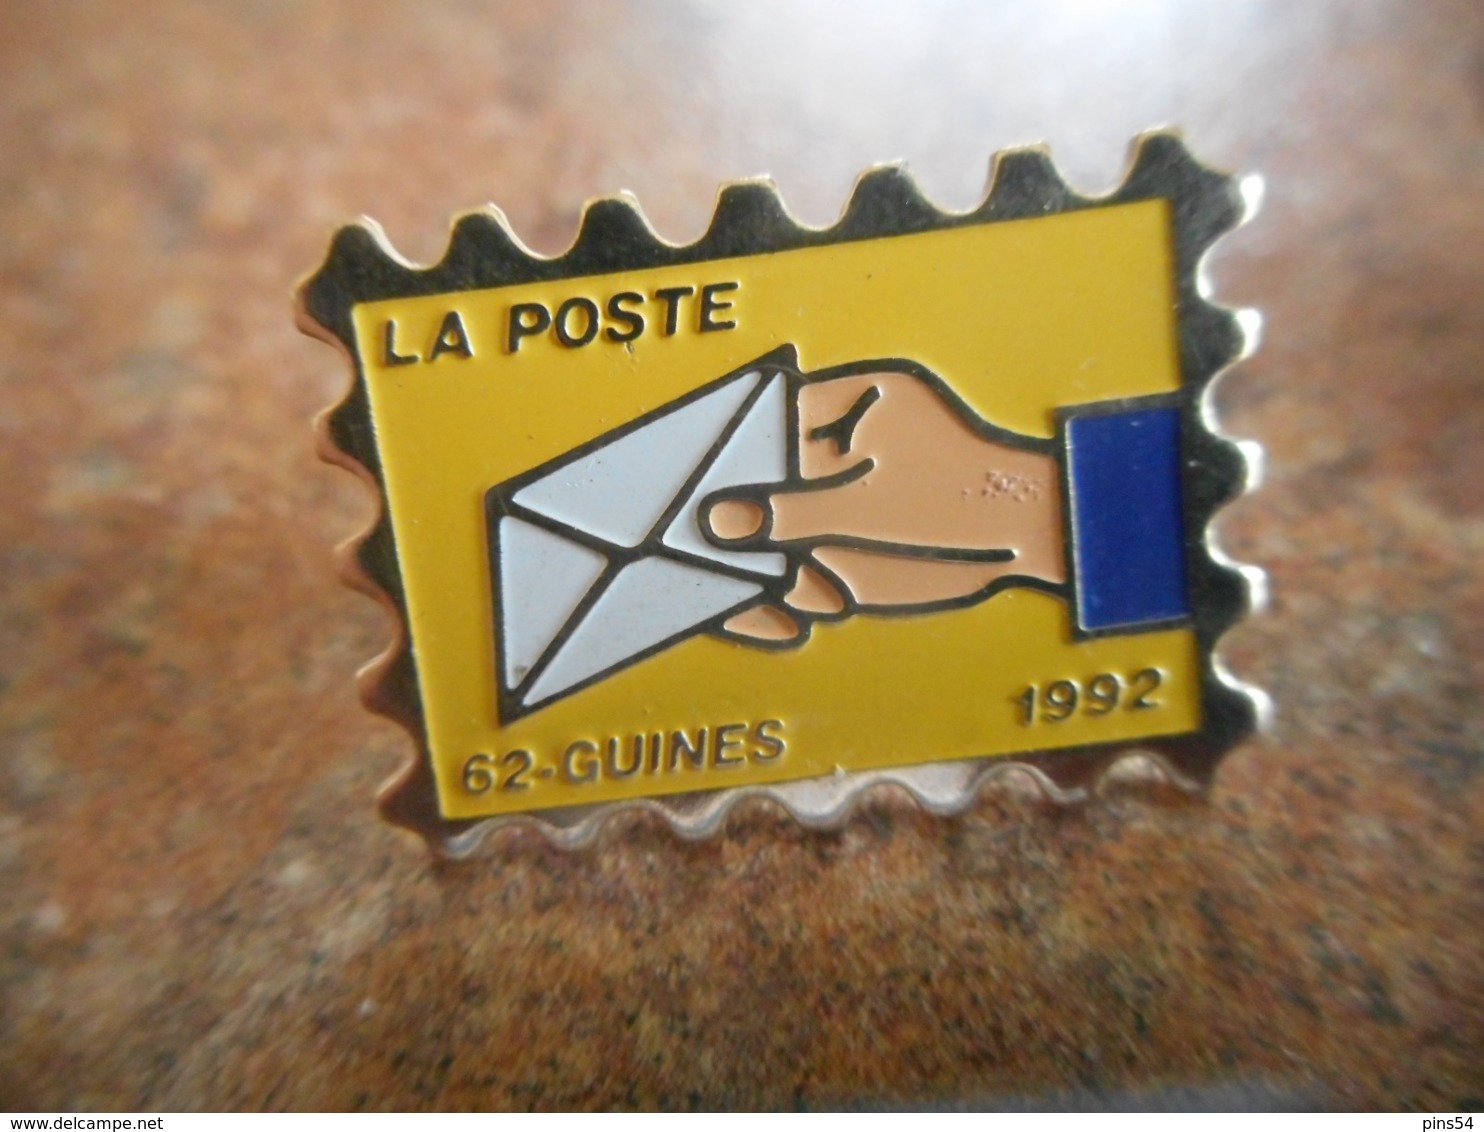 A040 -- Pin's Poste 62 Guines - Correo